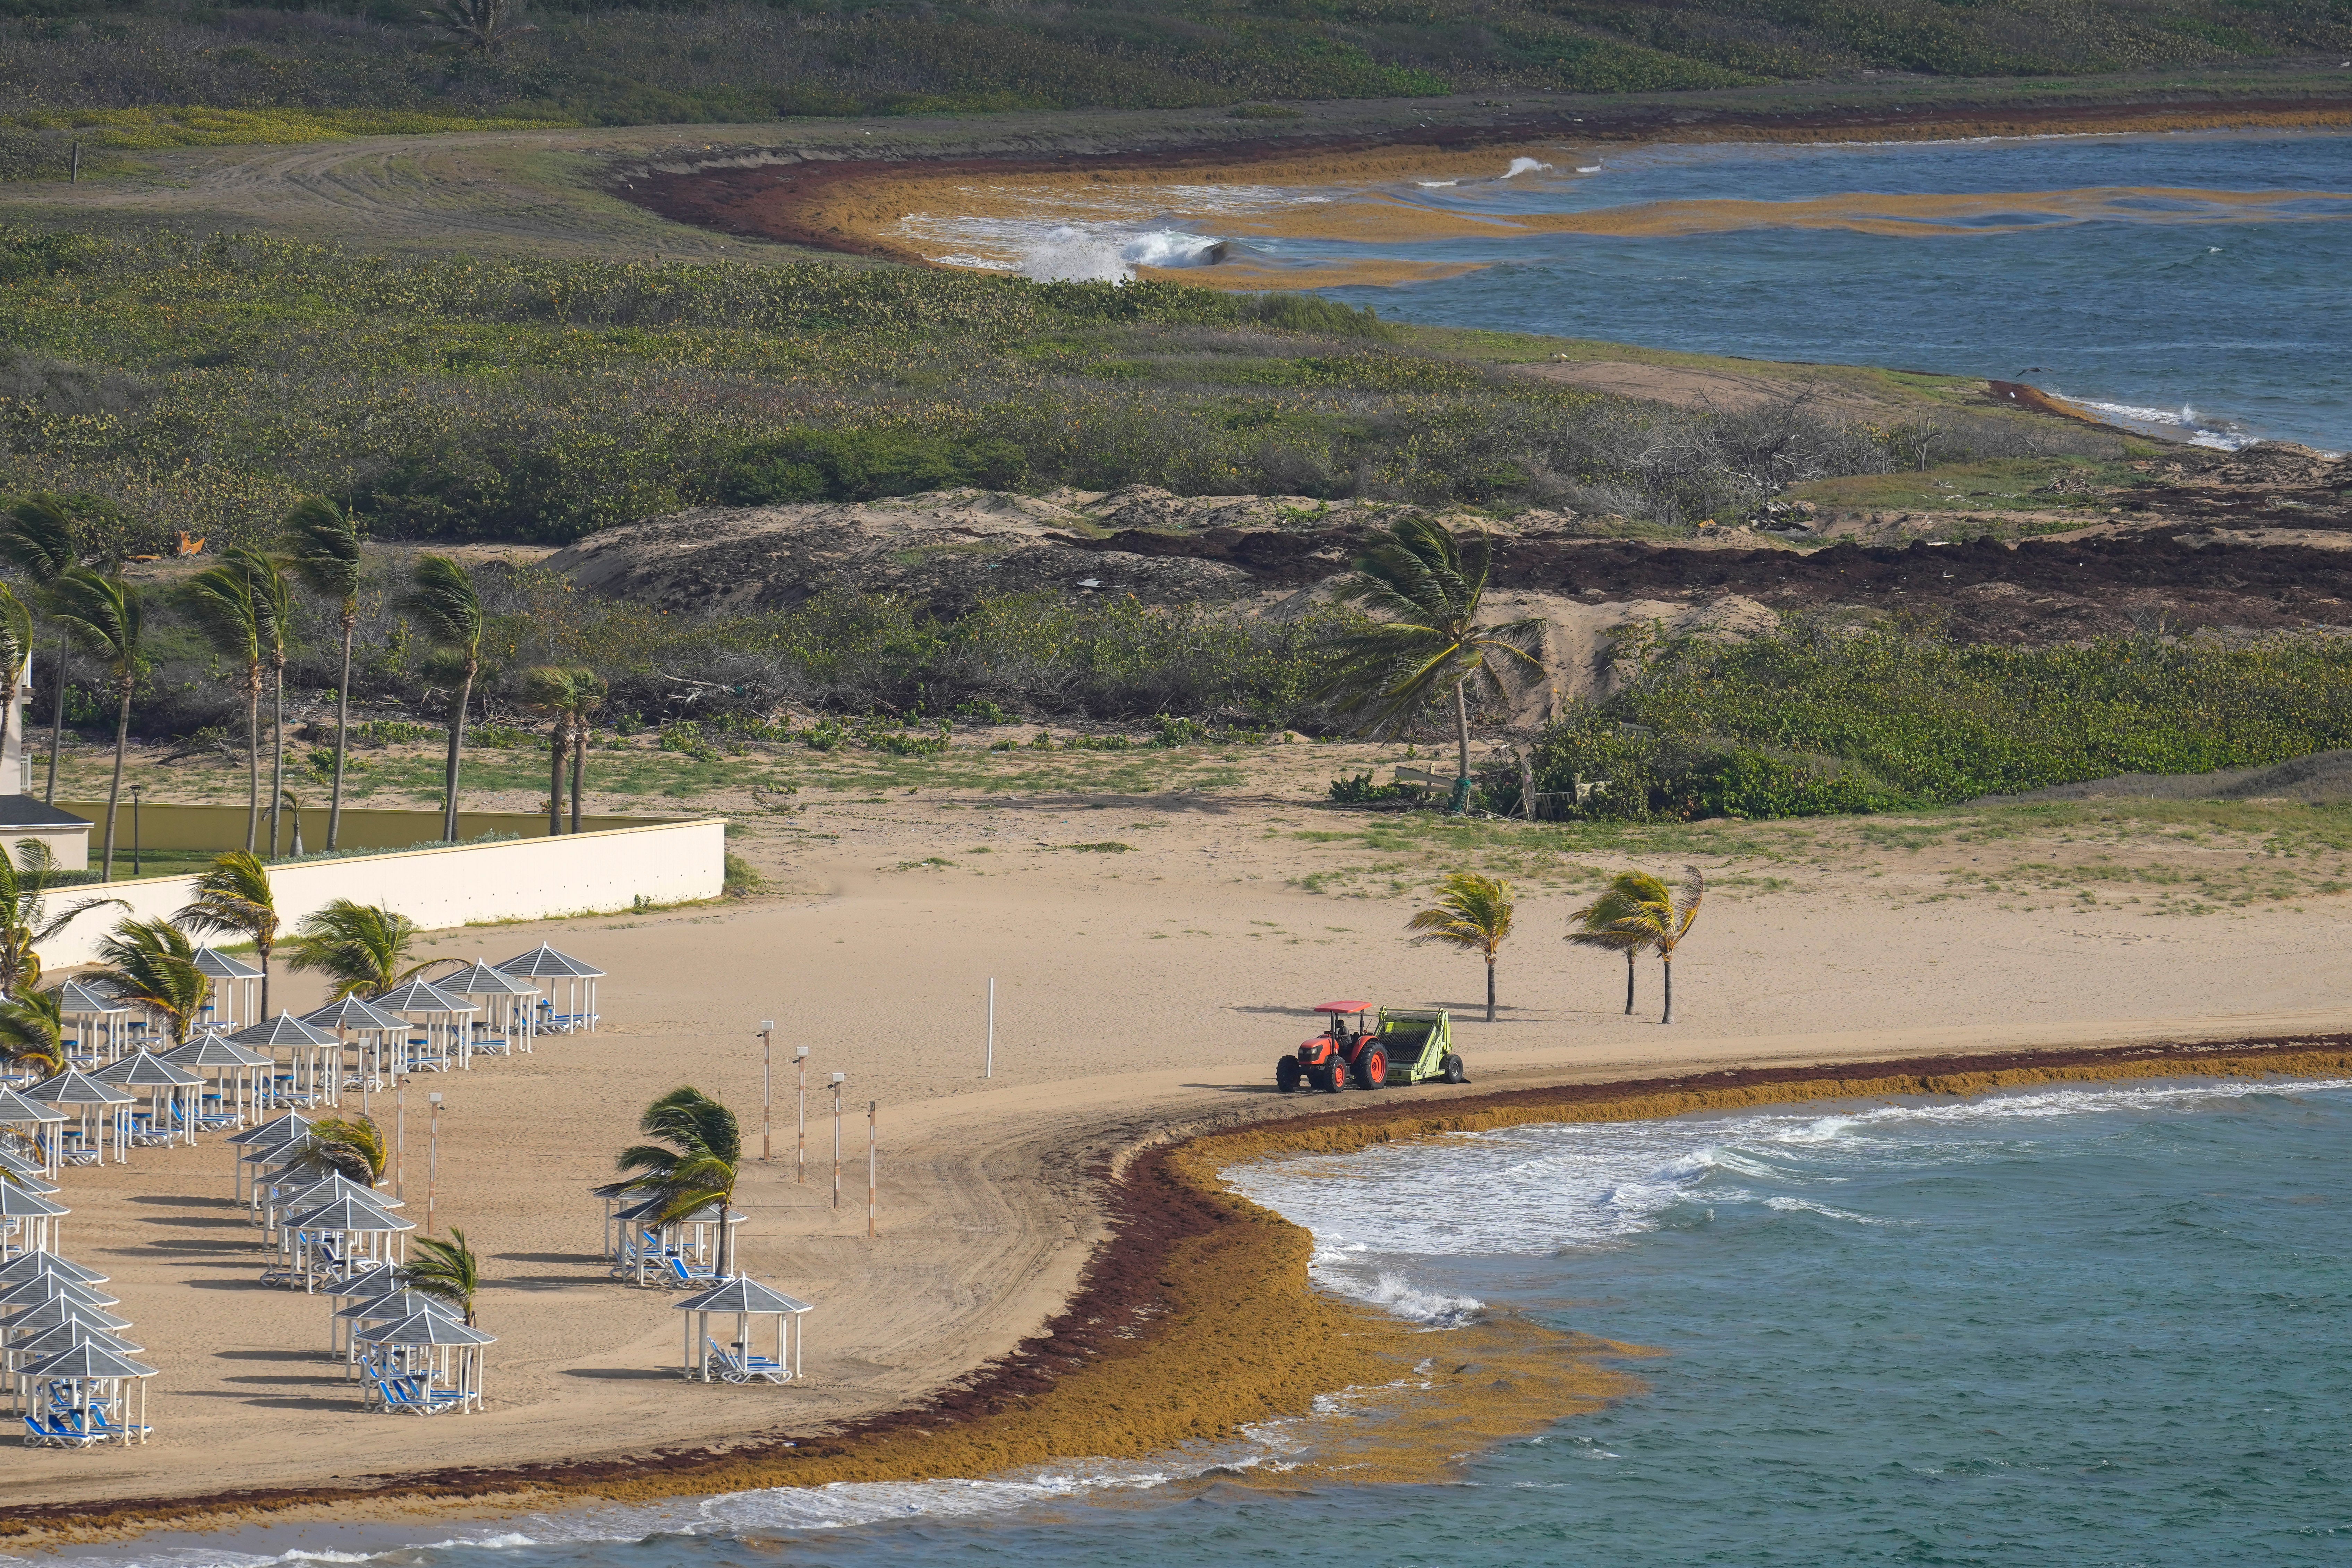 A tractor sweeps a beach lined with seaweed along the Atlantic shore in Frigate Bay, St. Kitts and Nevis